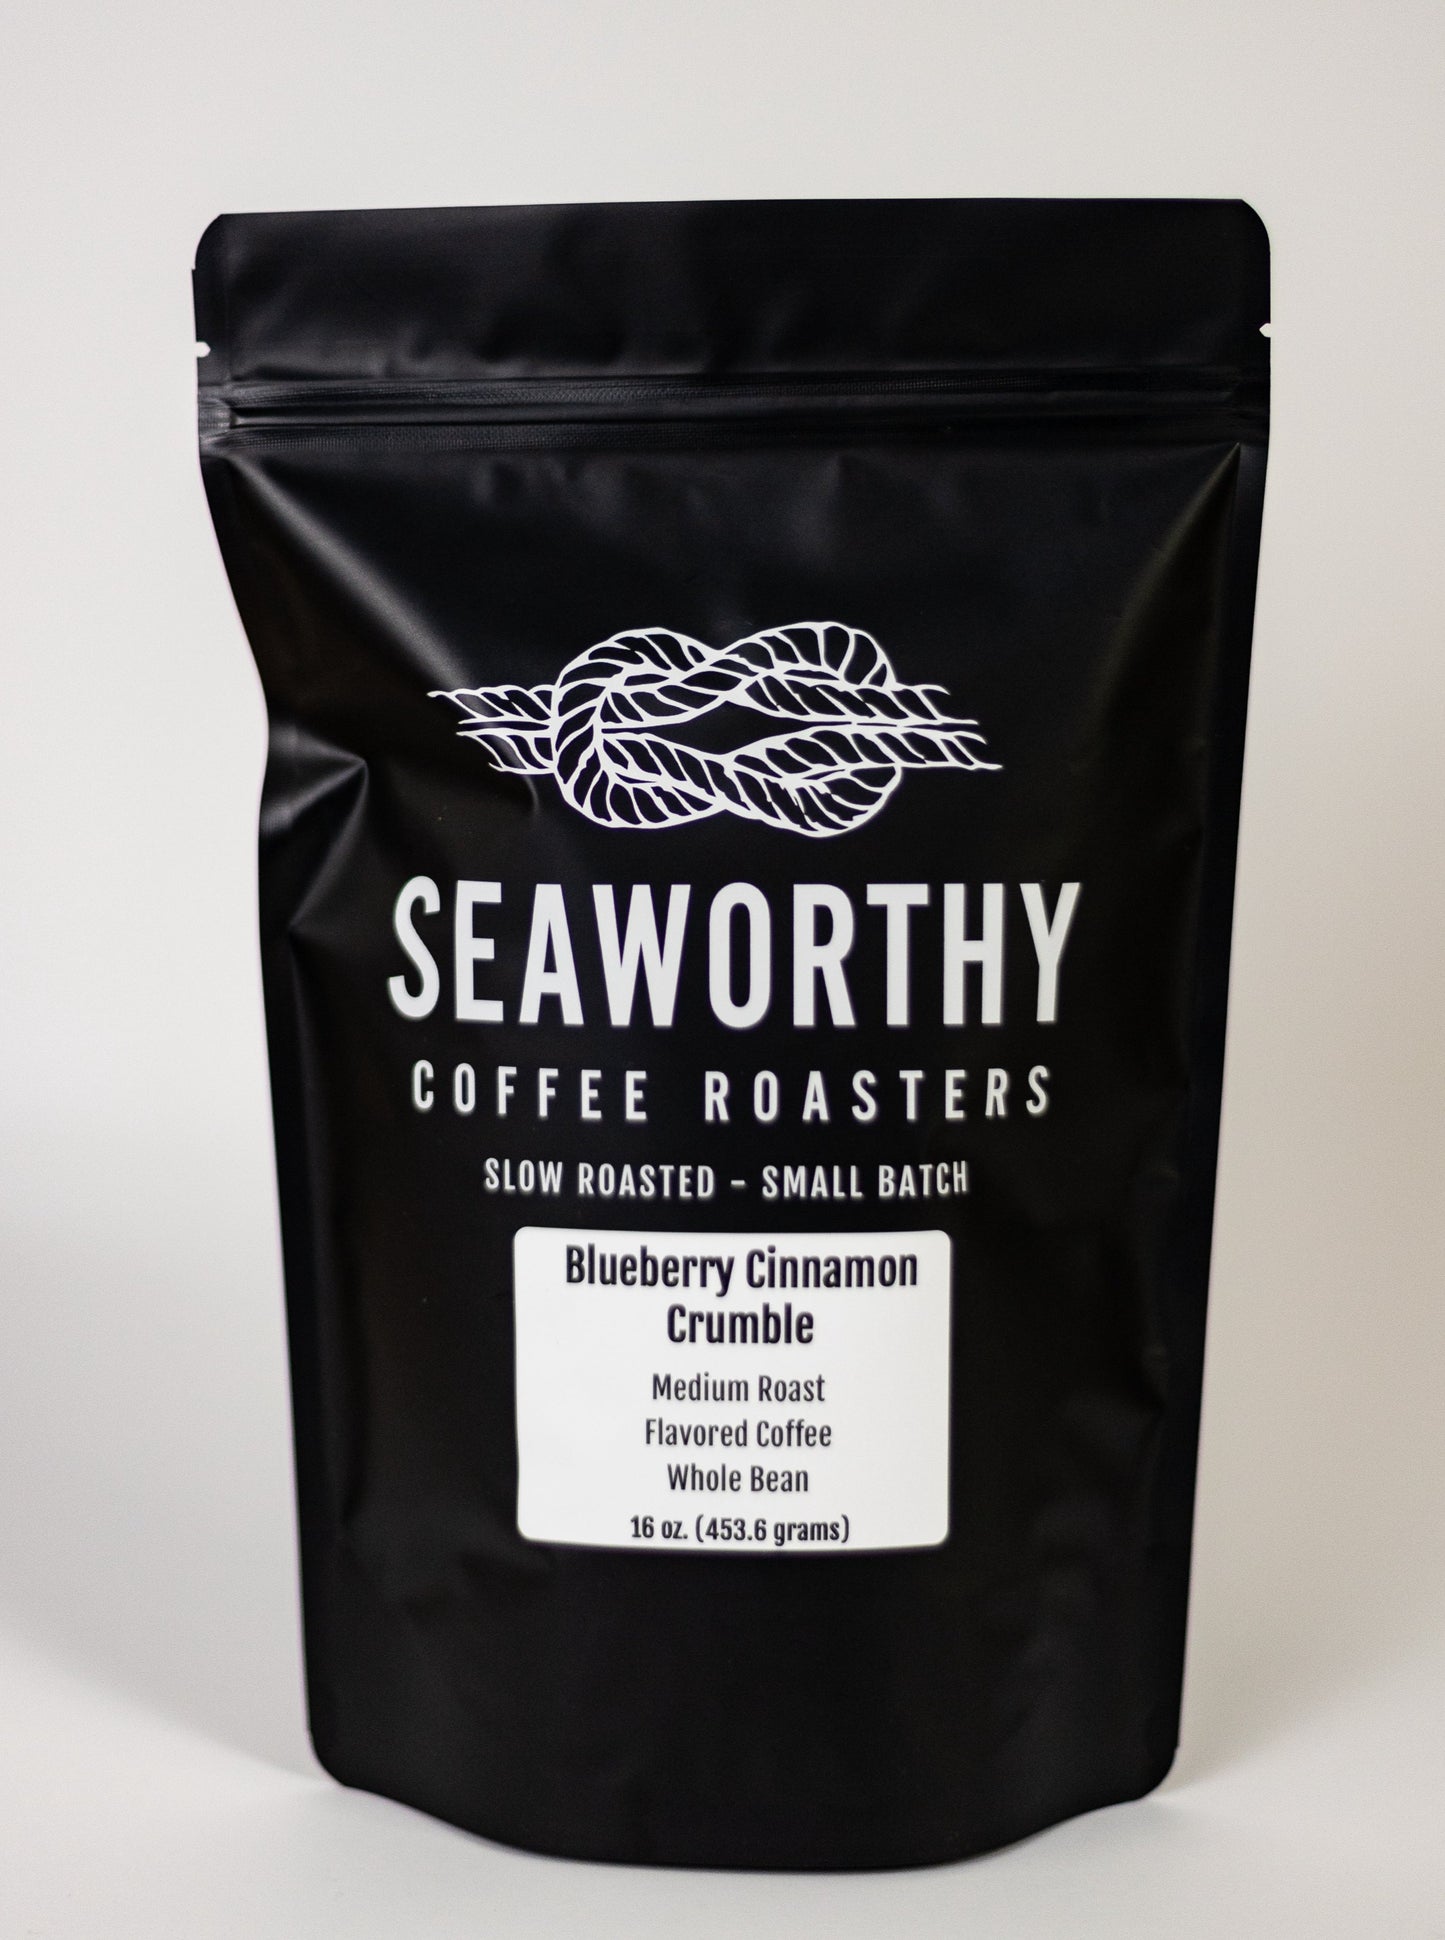 Seaworthy slow roasted, small batch coffee. With the taste of fresh blueberries bursting at the seams and warm cinnamon crumble in the backdrop, Blueberry Cinnamon Crumble will have your senses captivated before you even open the bag! *Allergen Free